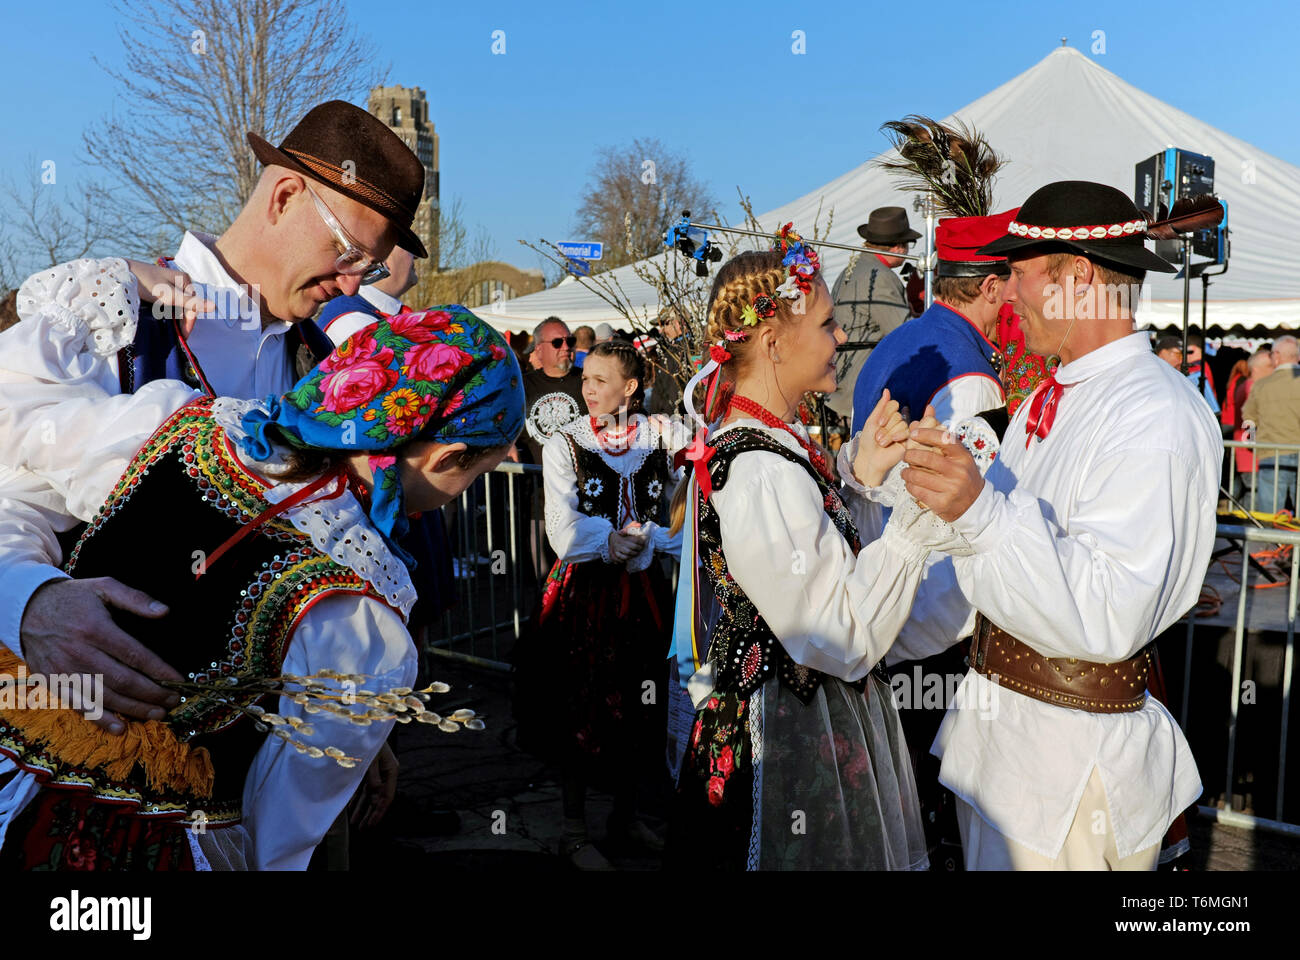 Couples dressed in traditional Polish outfits dance during the 2019 Dyngus Day celebration in Buffalo, New York, USA. Stock Photo